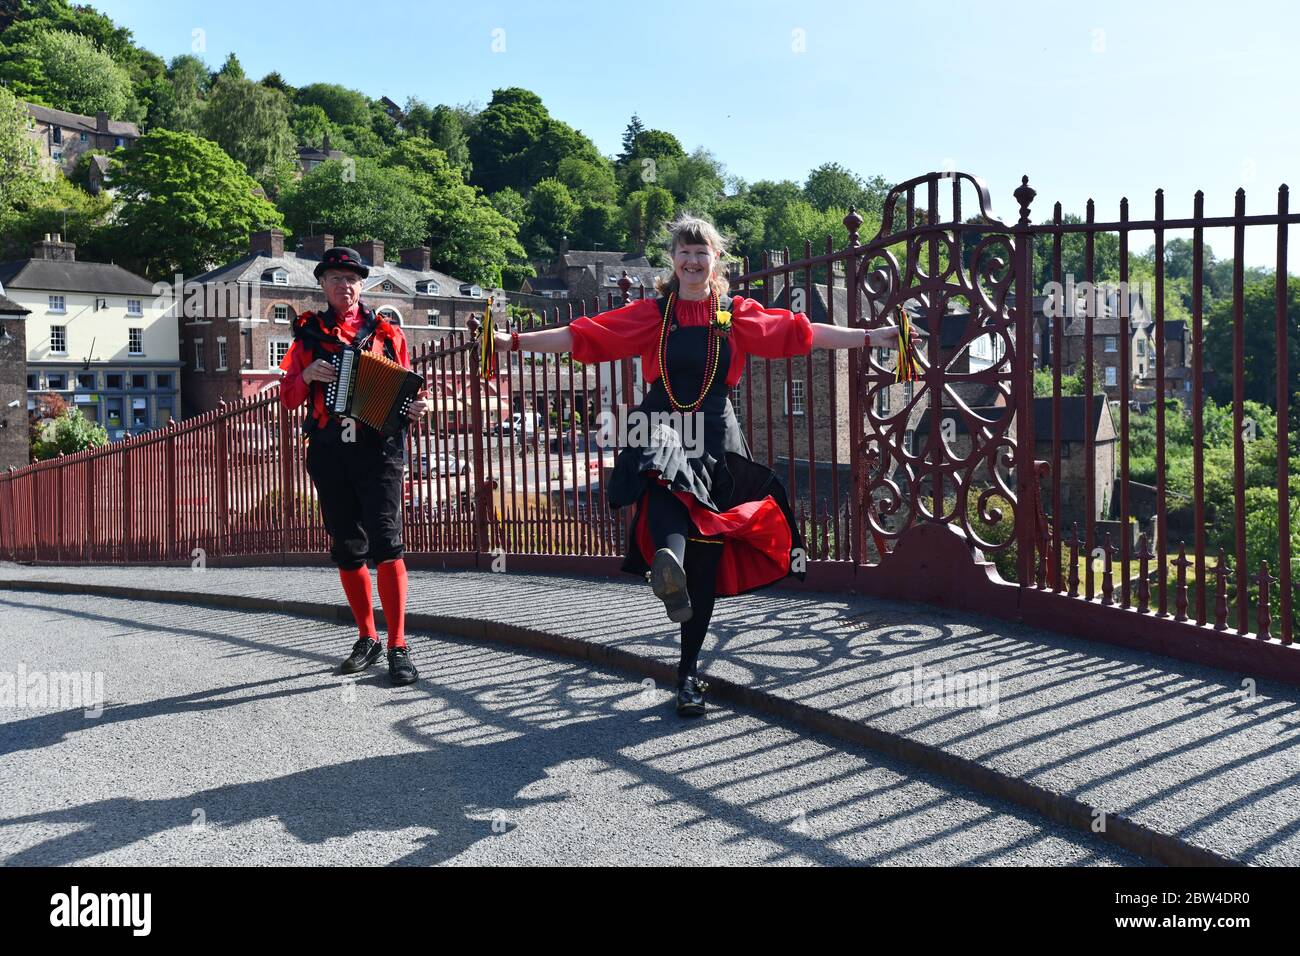 Ironbridge, Shropshire, Uk May 29th 2020 Ironbridge Morris dancers Pat and John Parnell came out of isolation today to dance on the world famous Iron Bridge near their home.The couple are members The Ironmen & Severn Gilders dance group and are taking part in a 'virtual dance event' and mass video of North West Morris called 'The Celebration' as part of a Morris participation event that can be done under lockdown and social distancing. Stock Photo